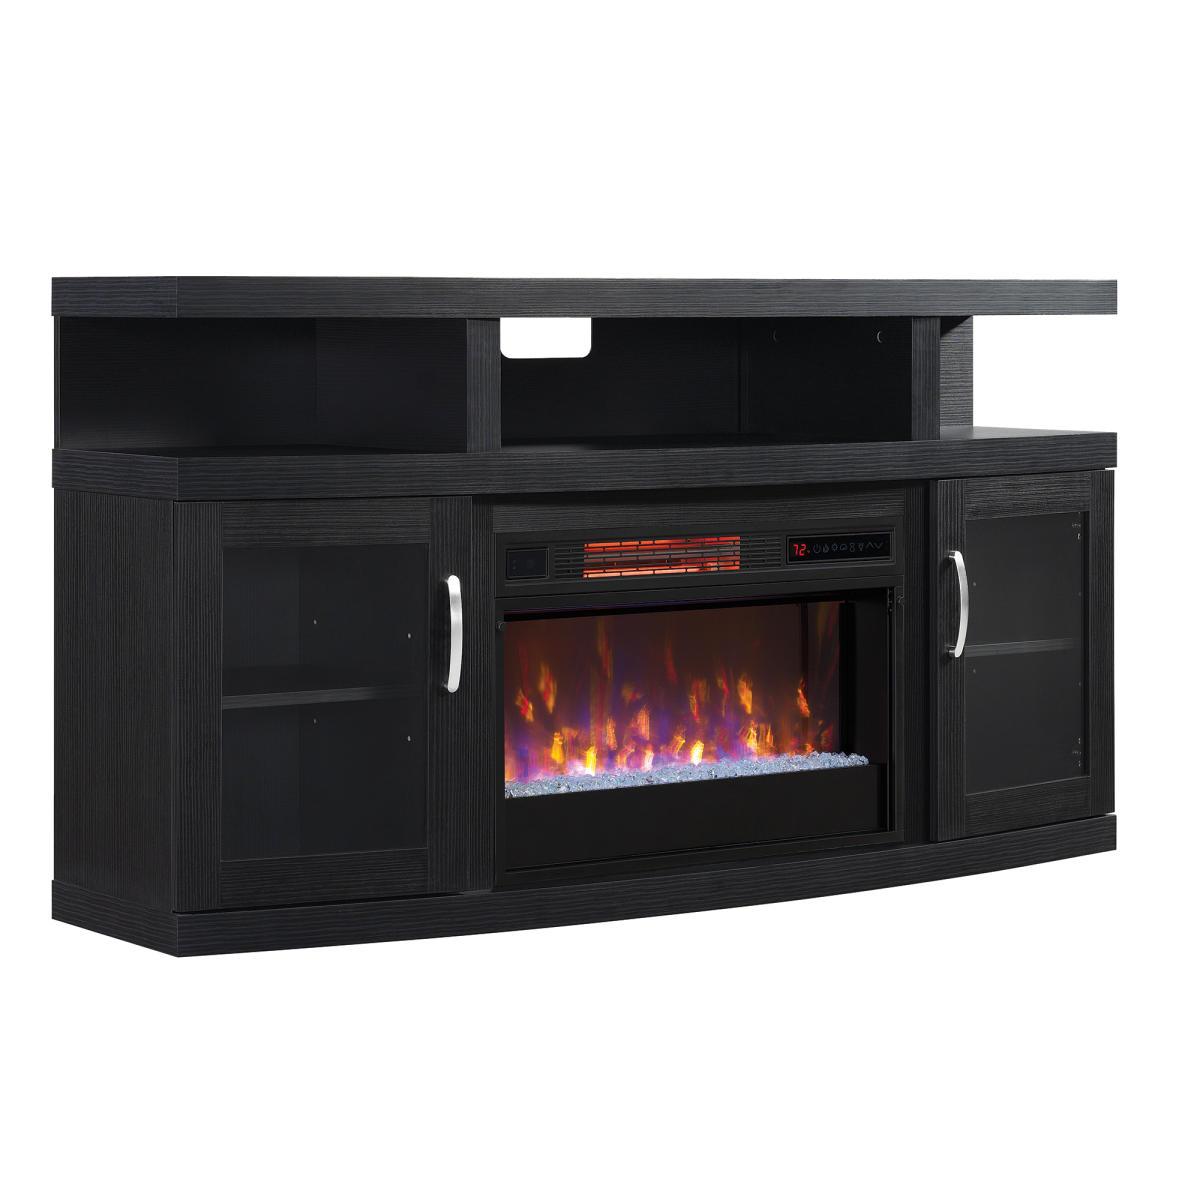 Fireplace Heating Unit with 2 Doors